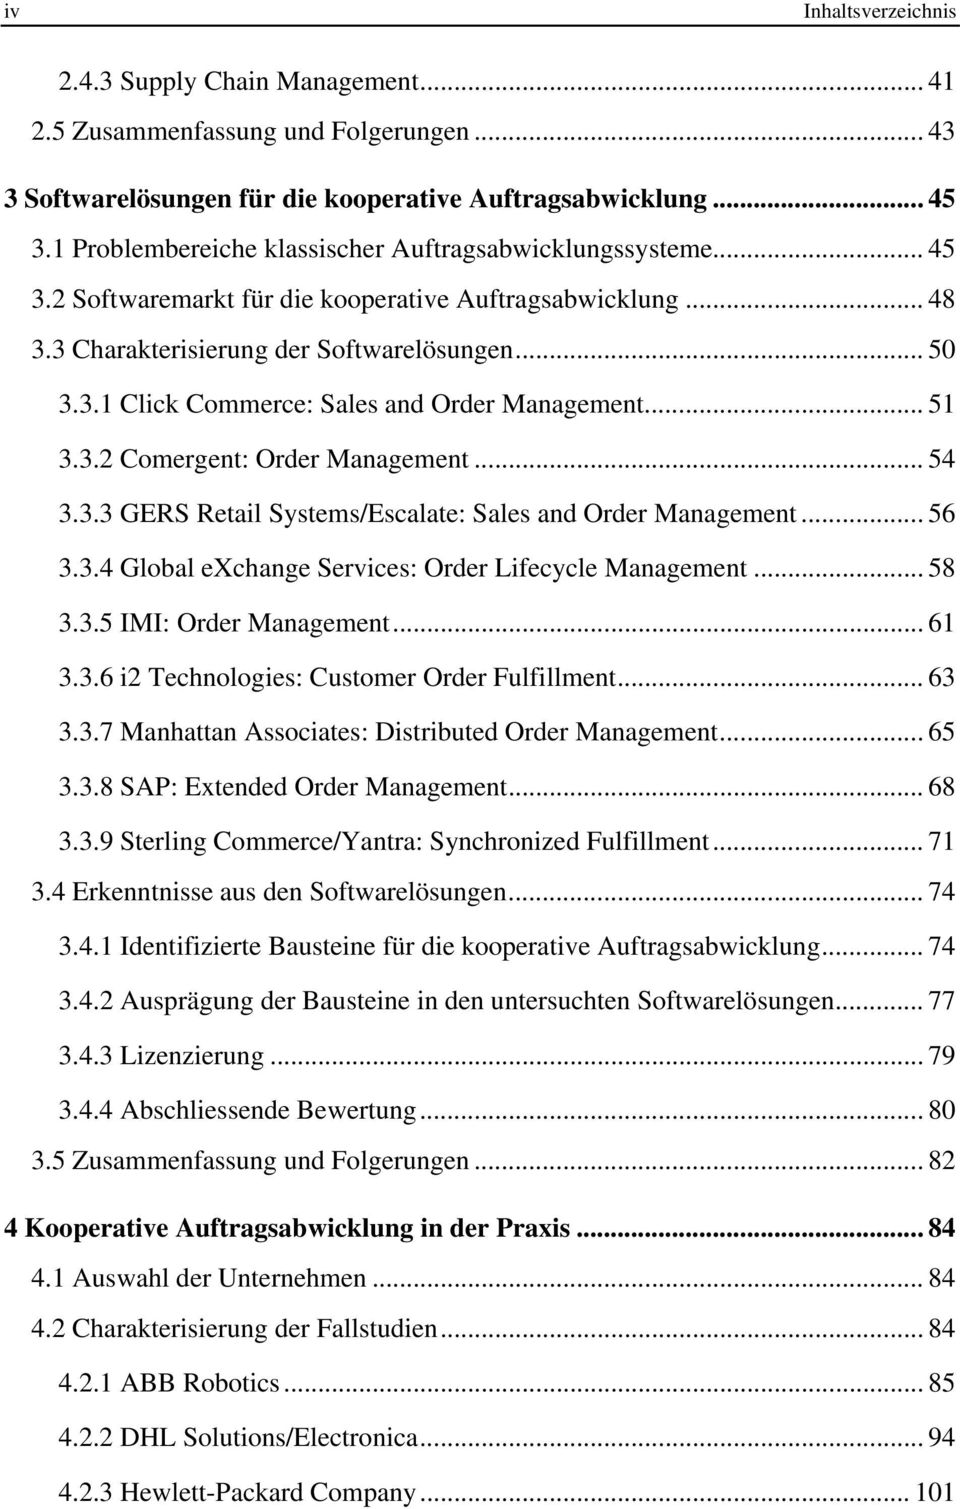 .. 51 3.3.2 Comergent: Order Management... 54 3.3.3 GERS Retail Systems/Escalate: Sales and Order Management... 56 3.3.4 Global exchange Services: Order Lifecycle Management... 58 3.3.5 IMI: Order Management.